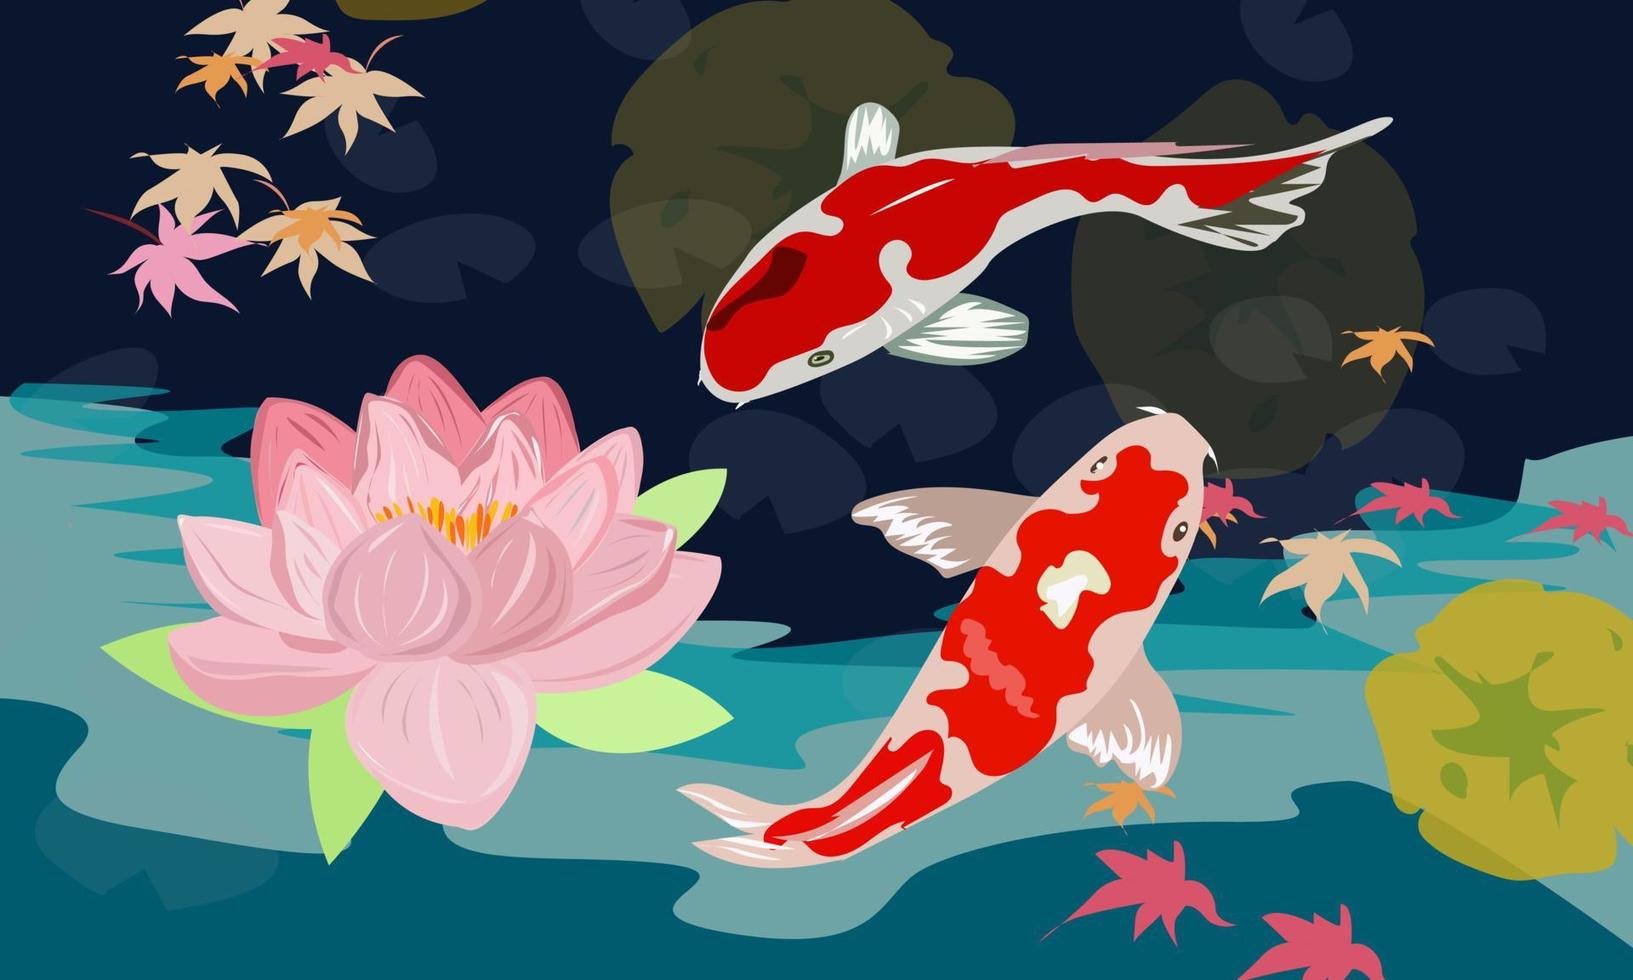 Lotus flower and koi carp in the pond vector